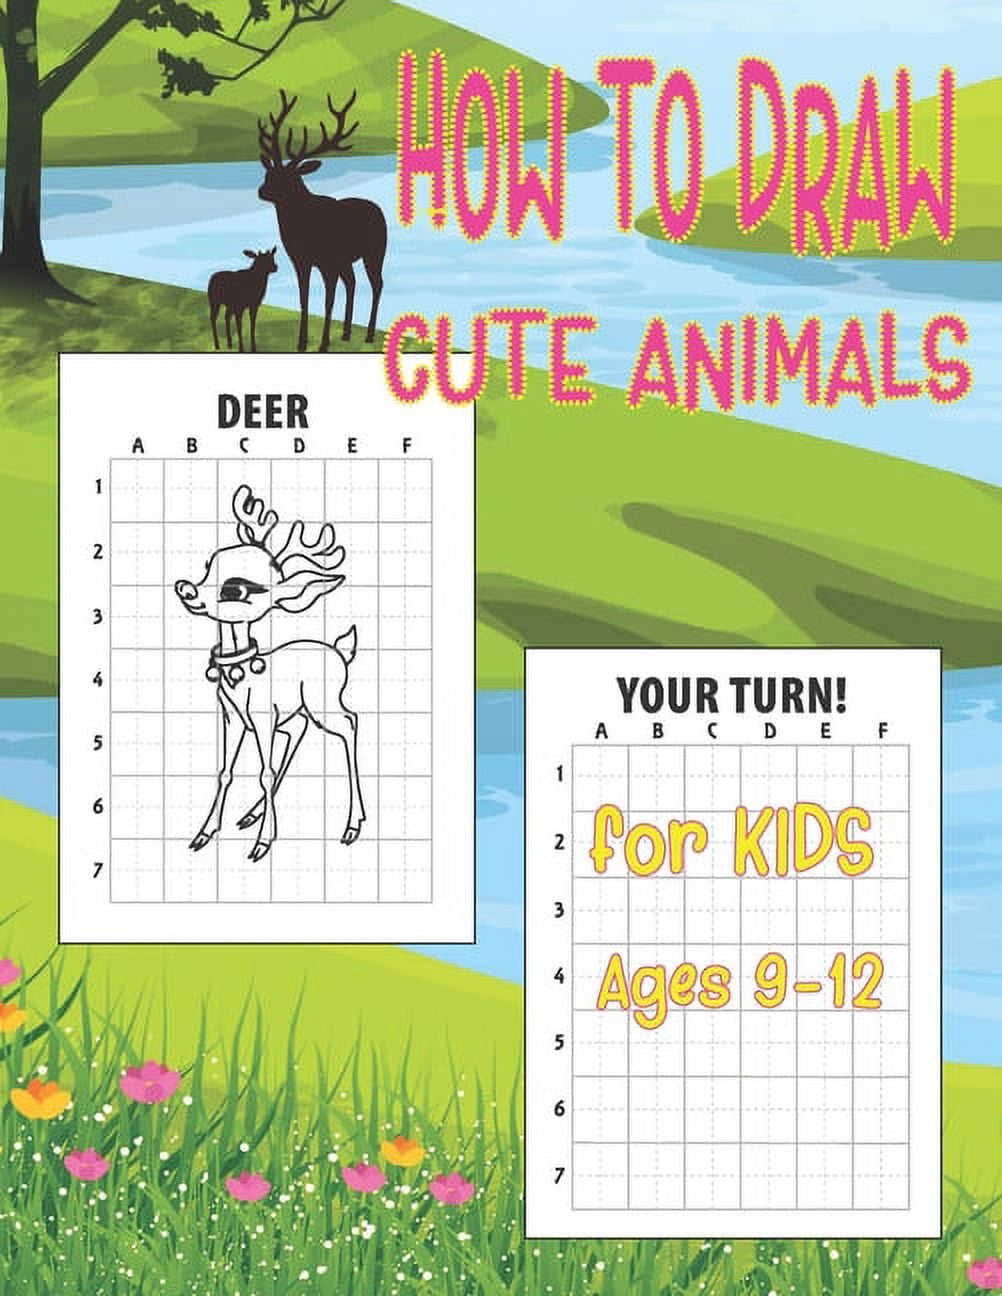 How to Draw Book For Kids Ages 9-12: Drawing Cute Animals / How to Draw  Cute Animals / Draw Animals in the Cutest Style Ever! by Eva Publisher